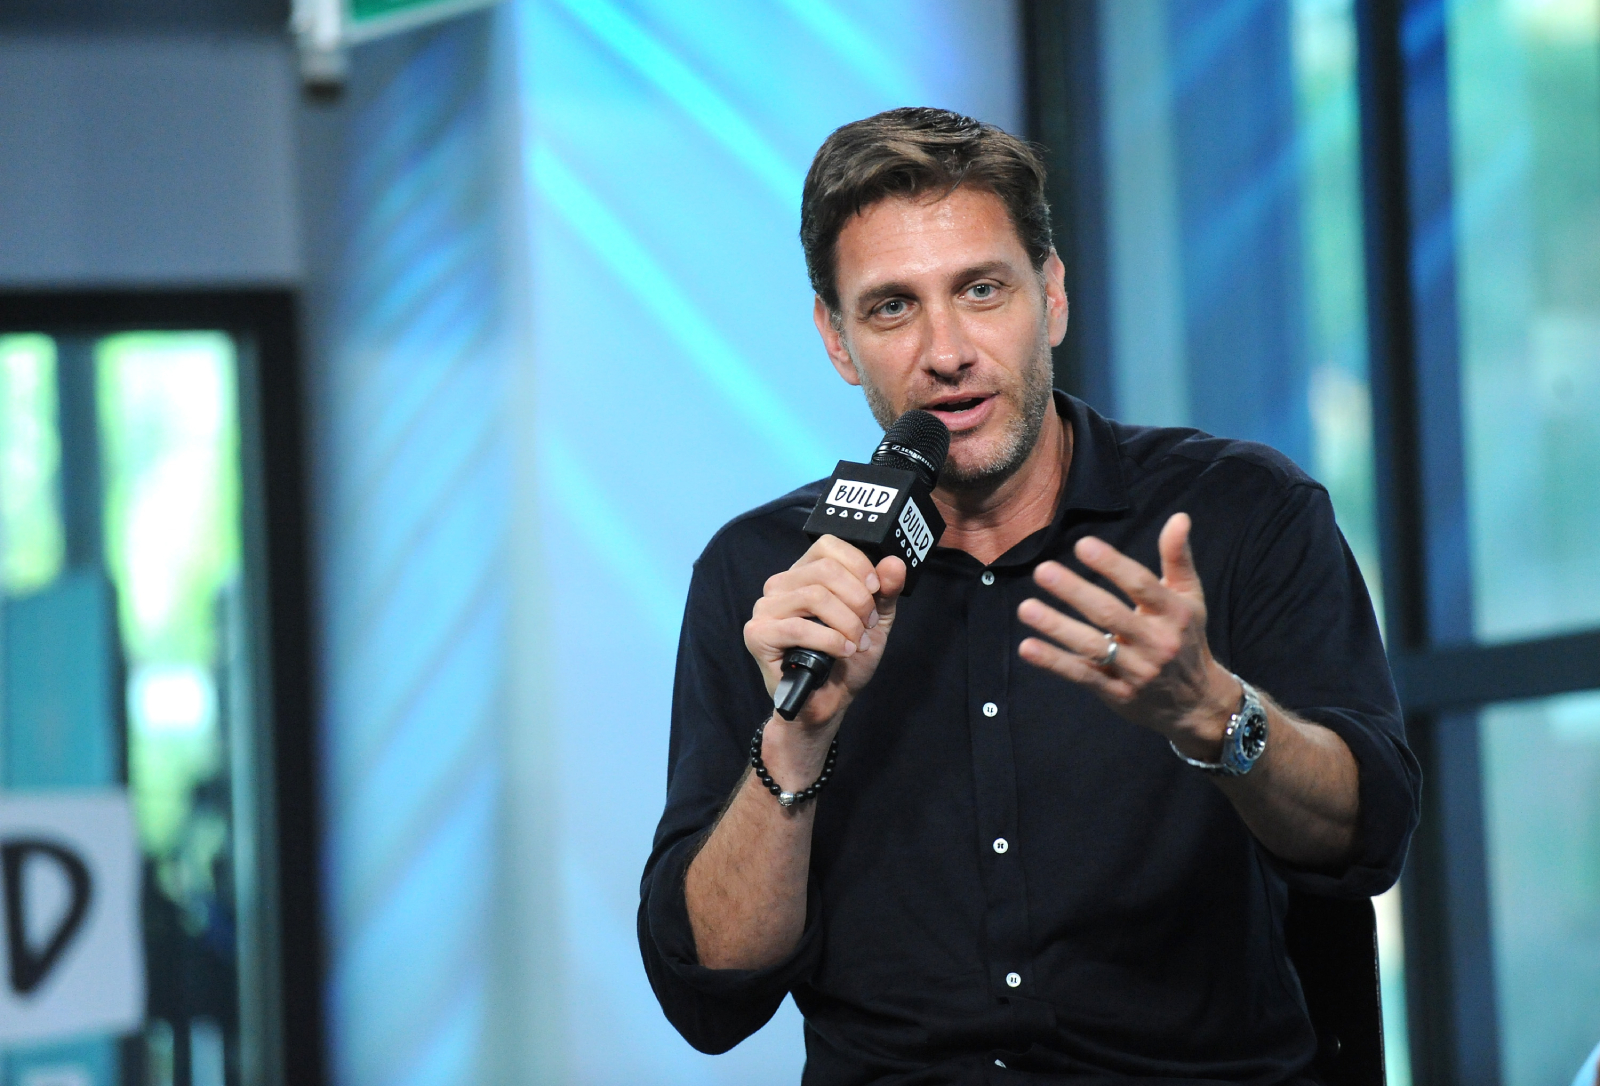 Mike Greenberg is a massive New York Jets fan. He has since reacted to their recent devastating move, though, that could hurt them for years.